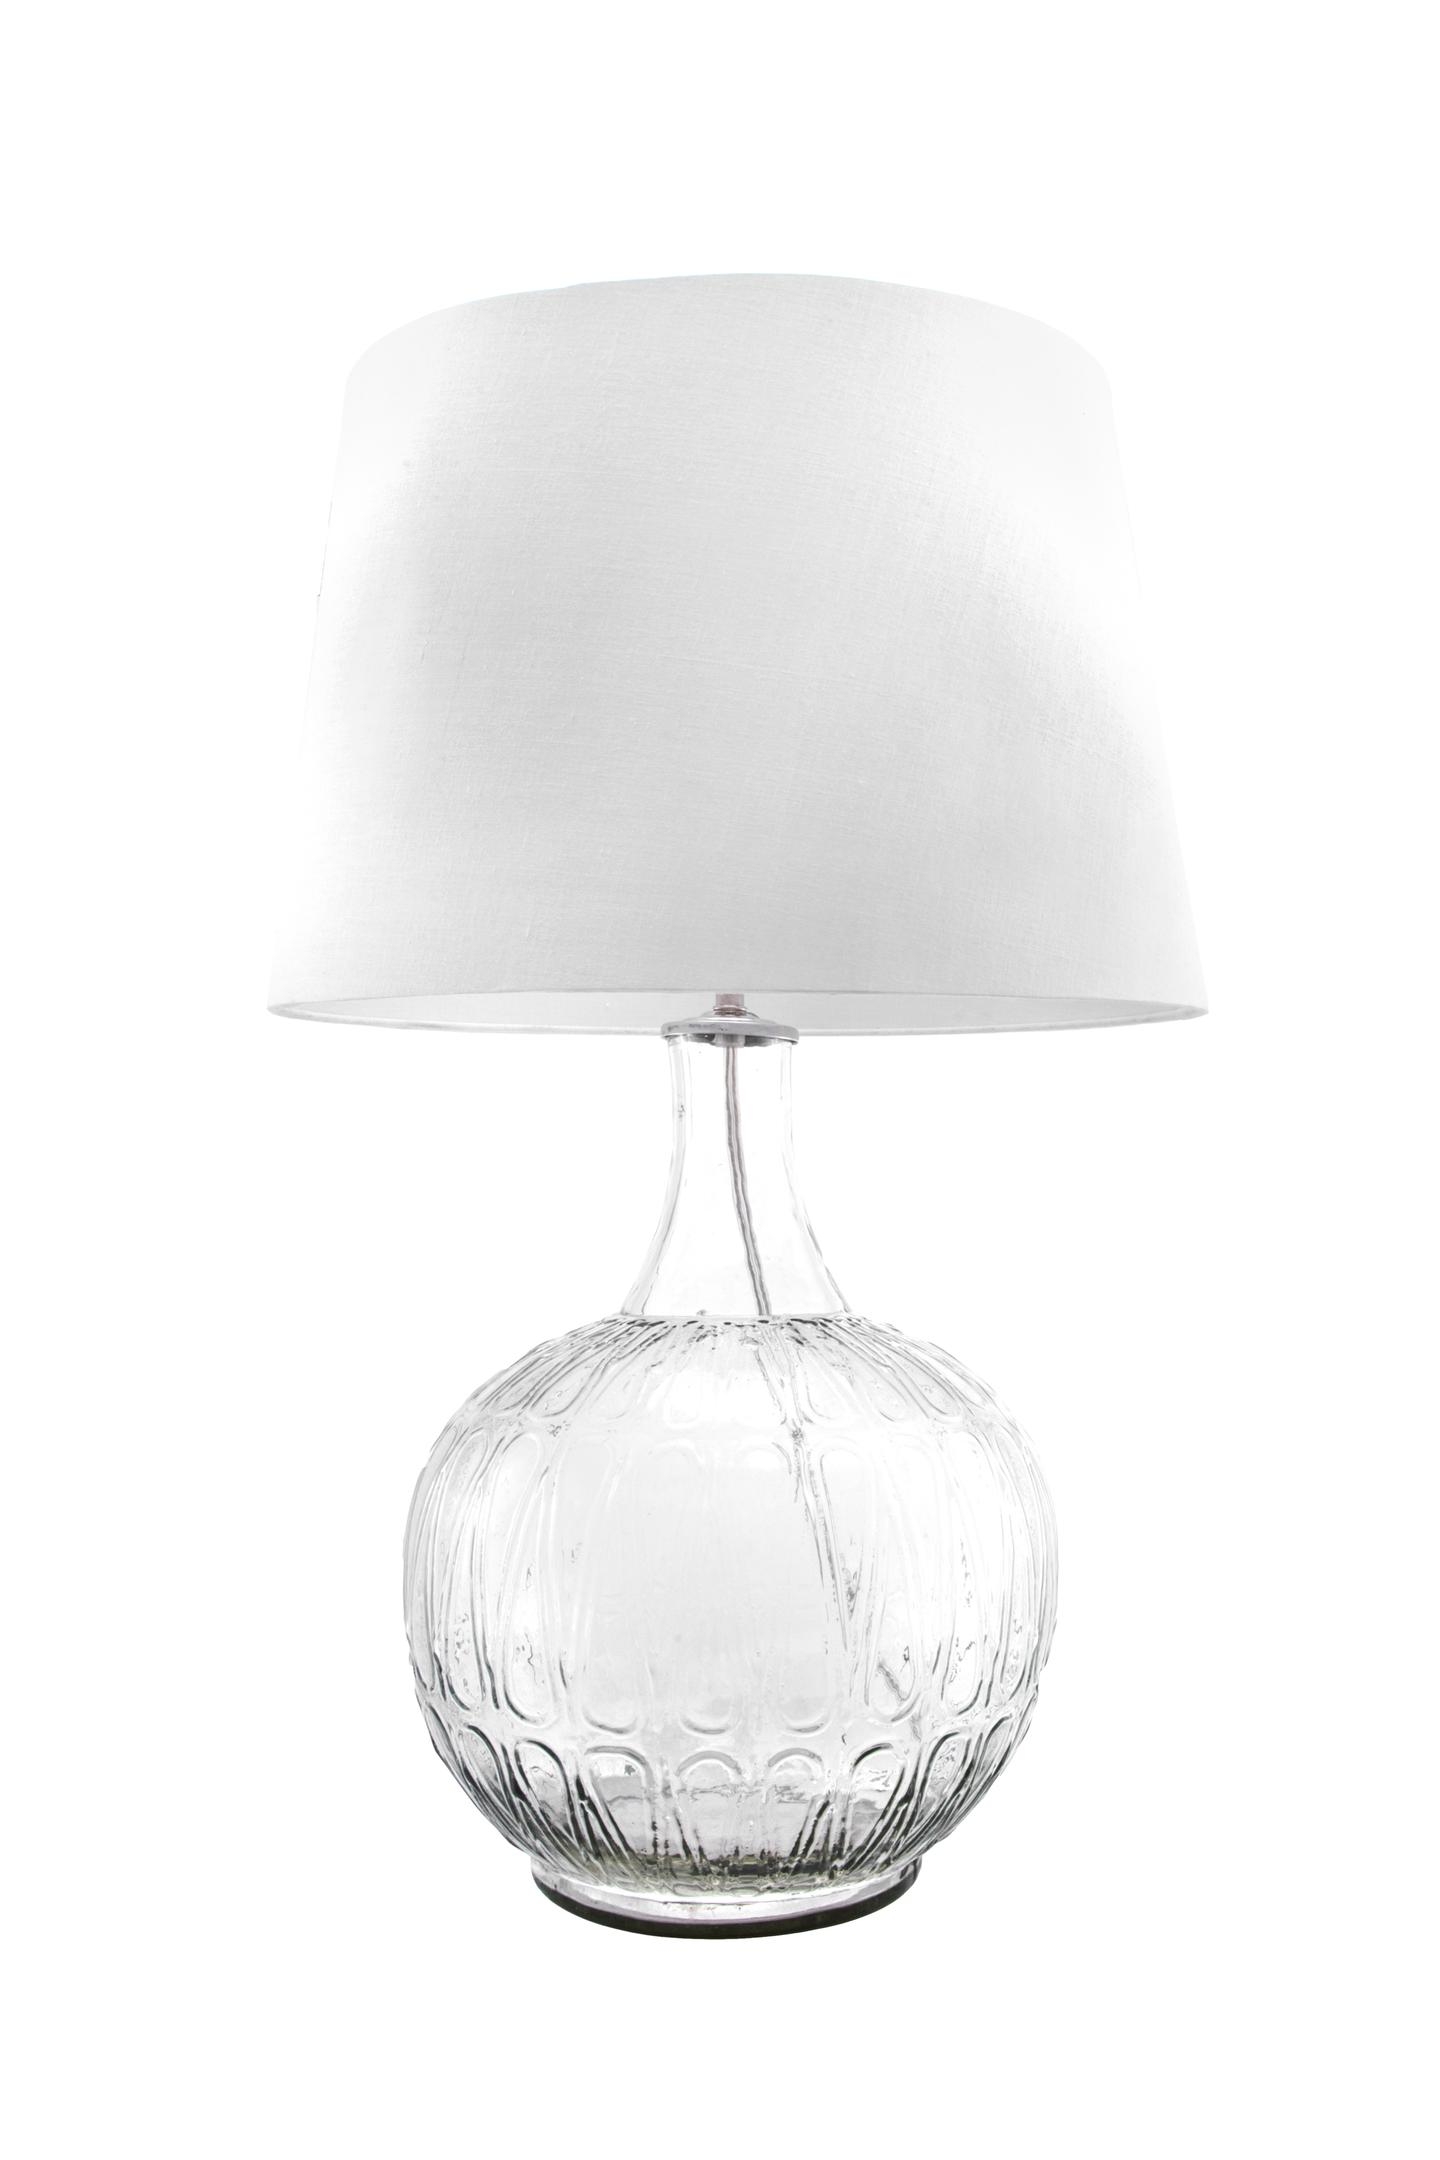 Margate 26" Glass Table Lamp - Image 1